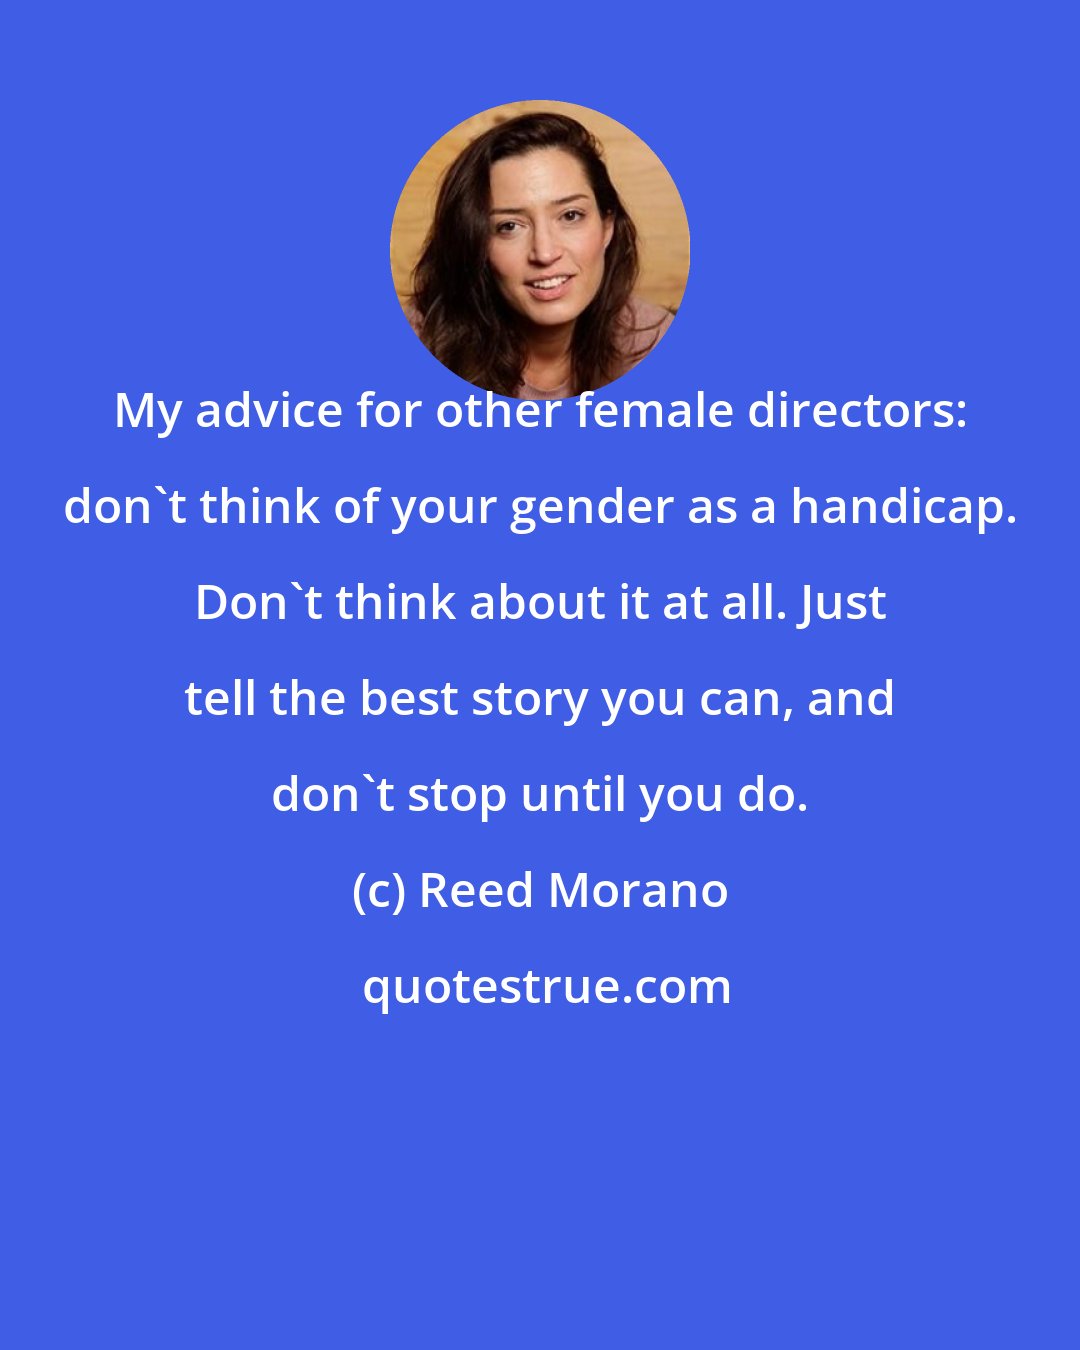 Reed Morano: My advice for other female directors: don't think of your gender as a handicap. Don't think about it at all. Just tell the best story you can, and don't stop until you do.